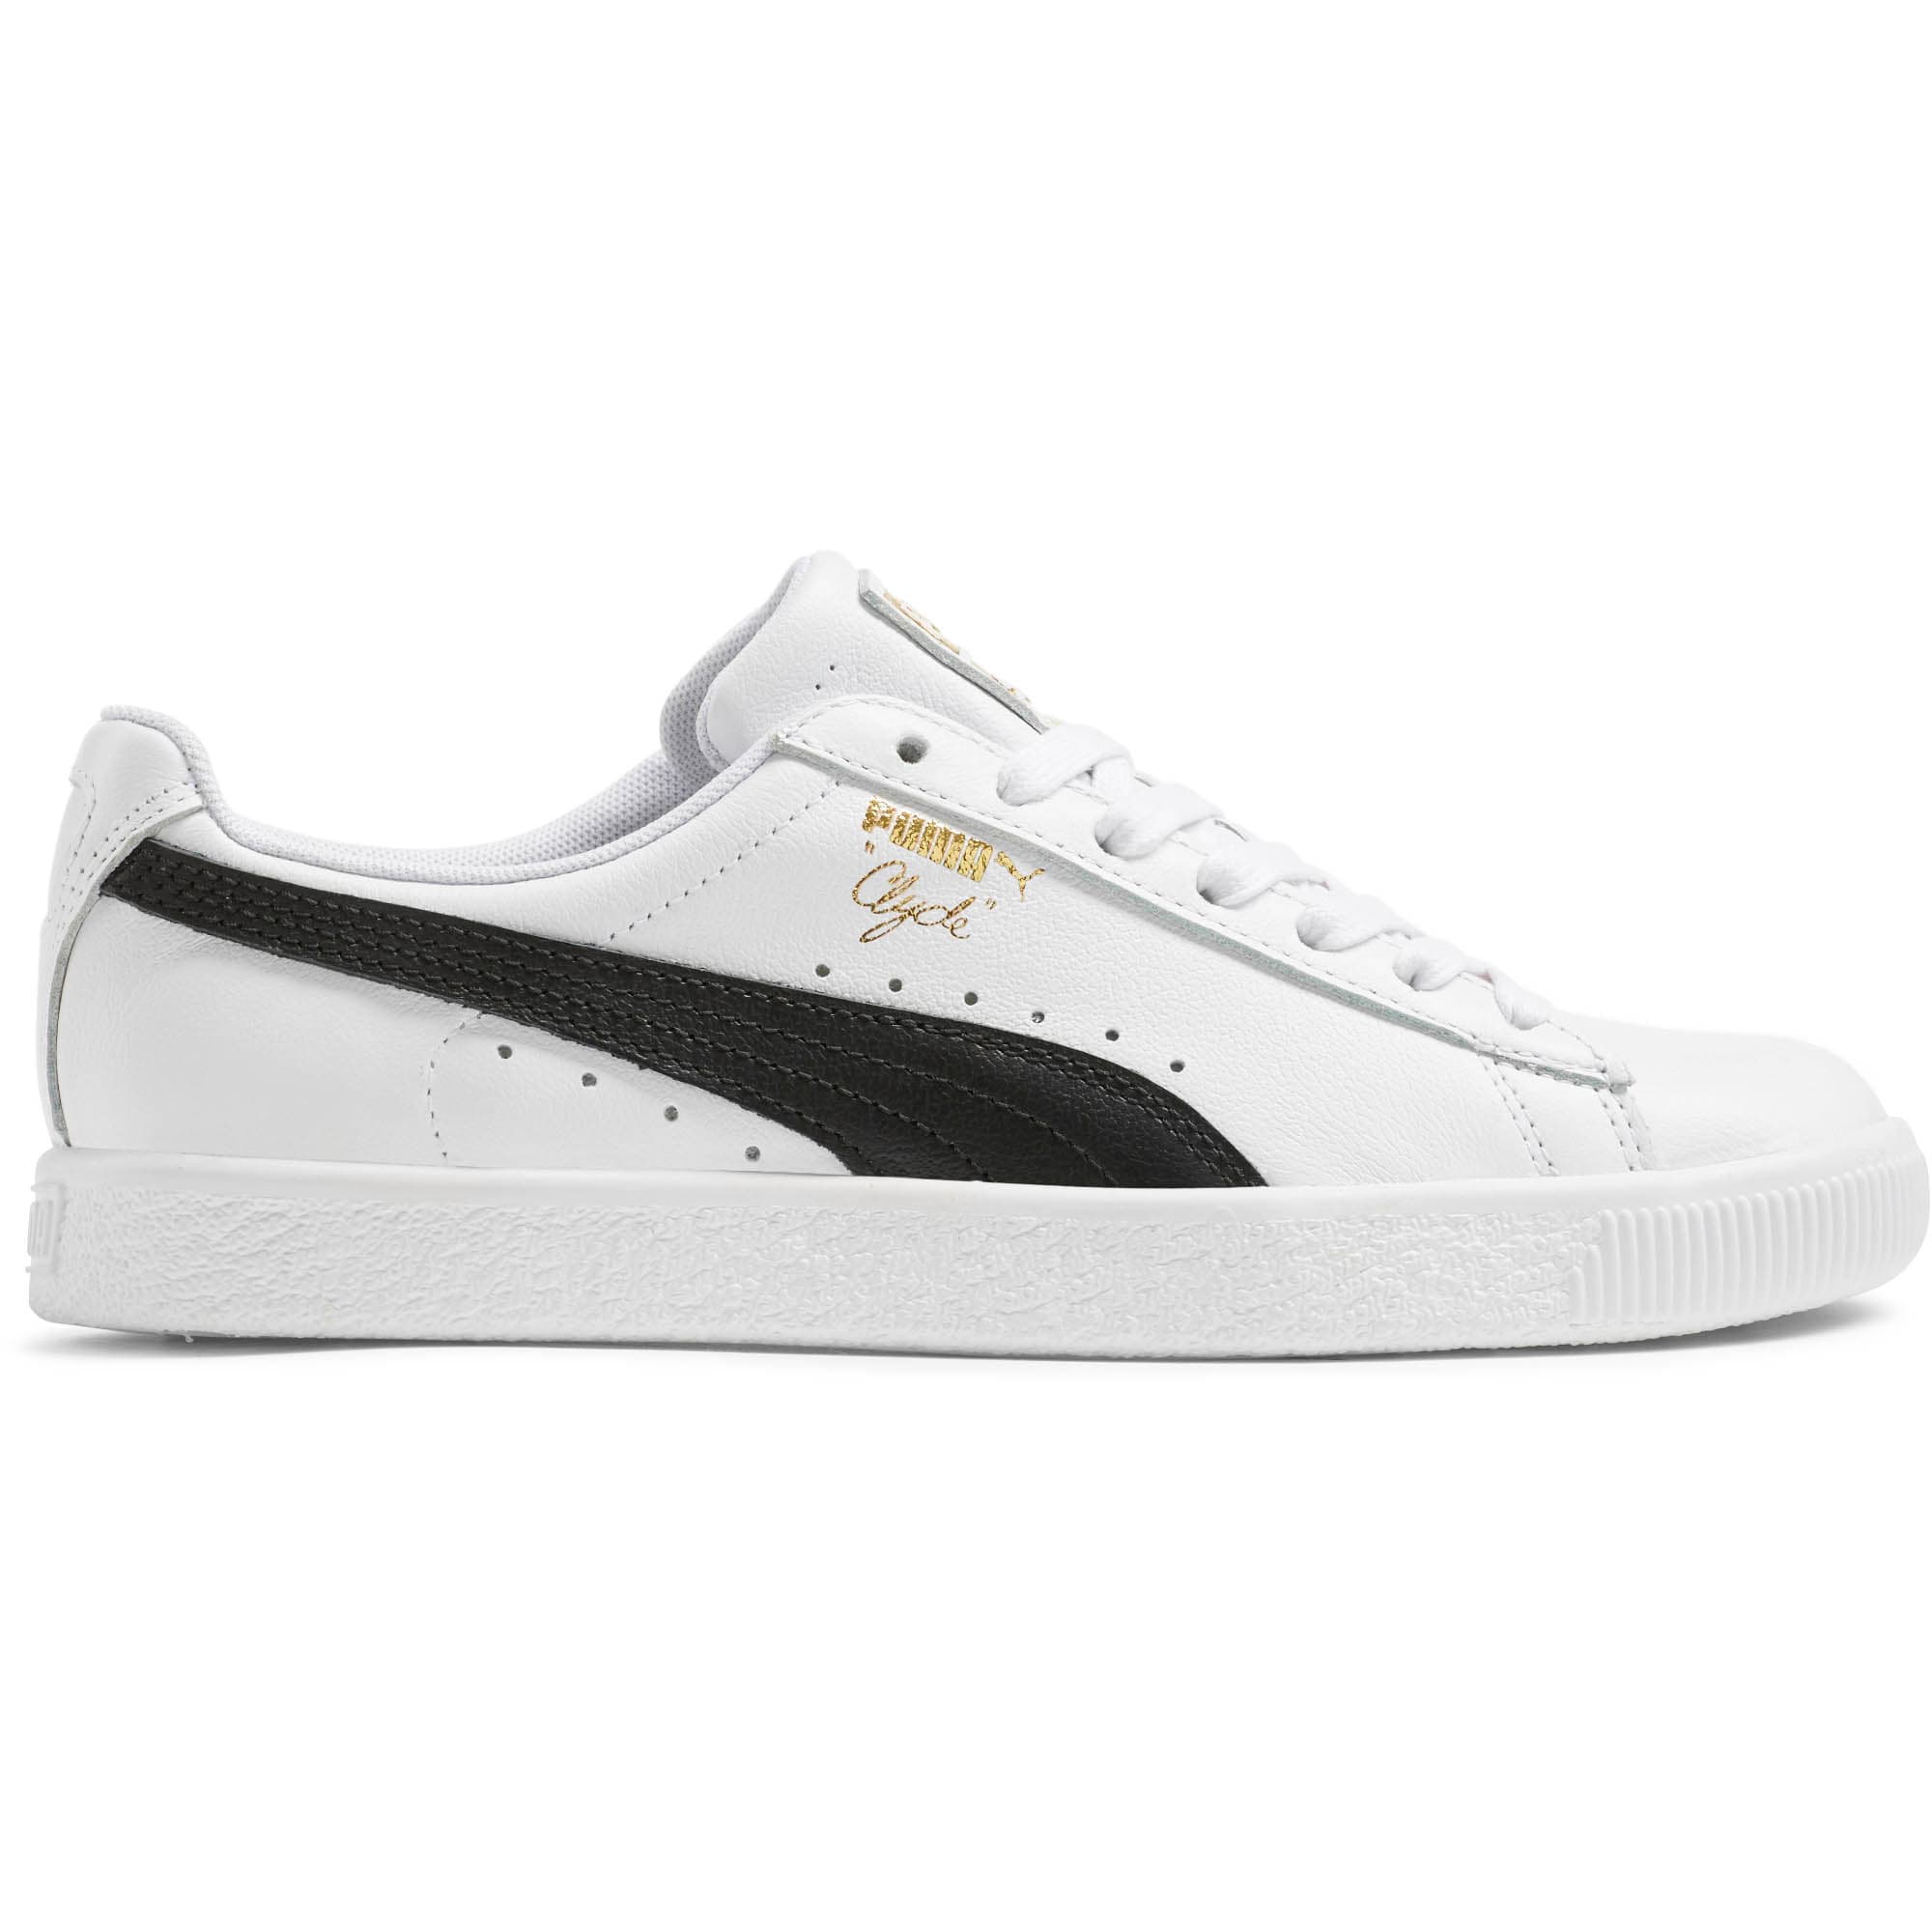 puma clyde core leather sneakers